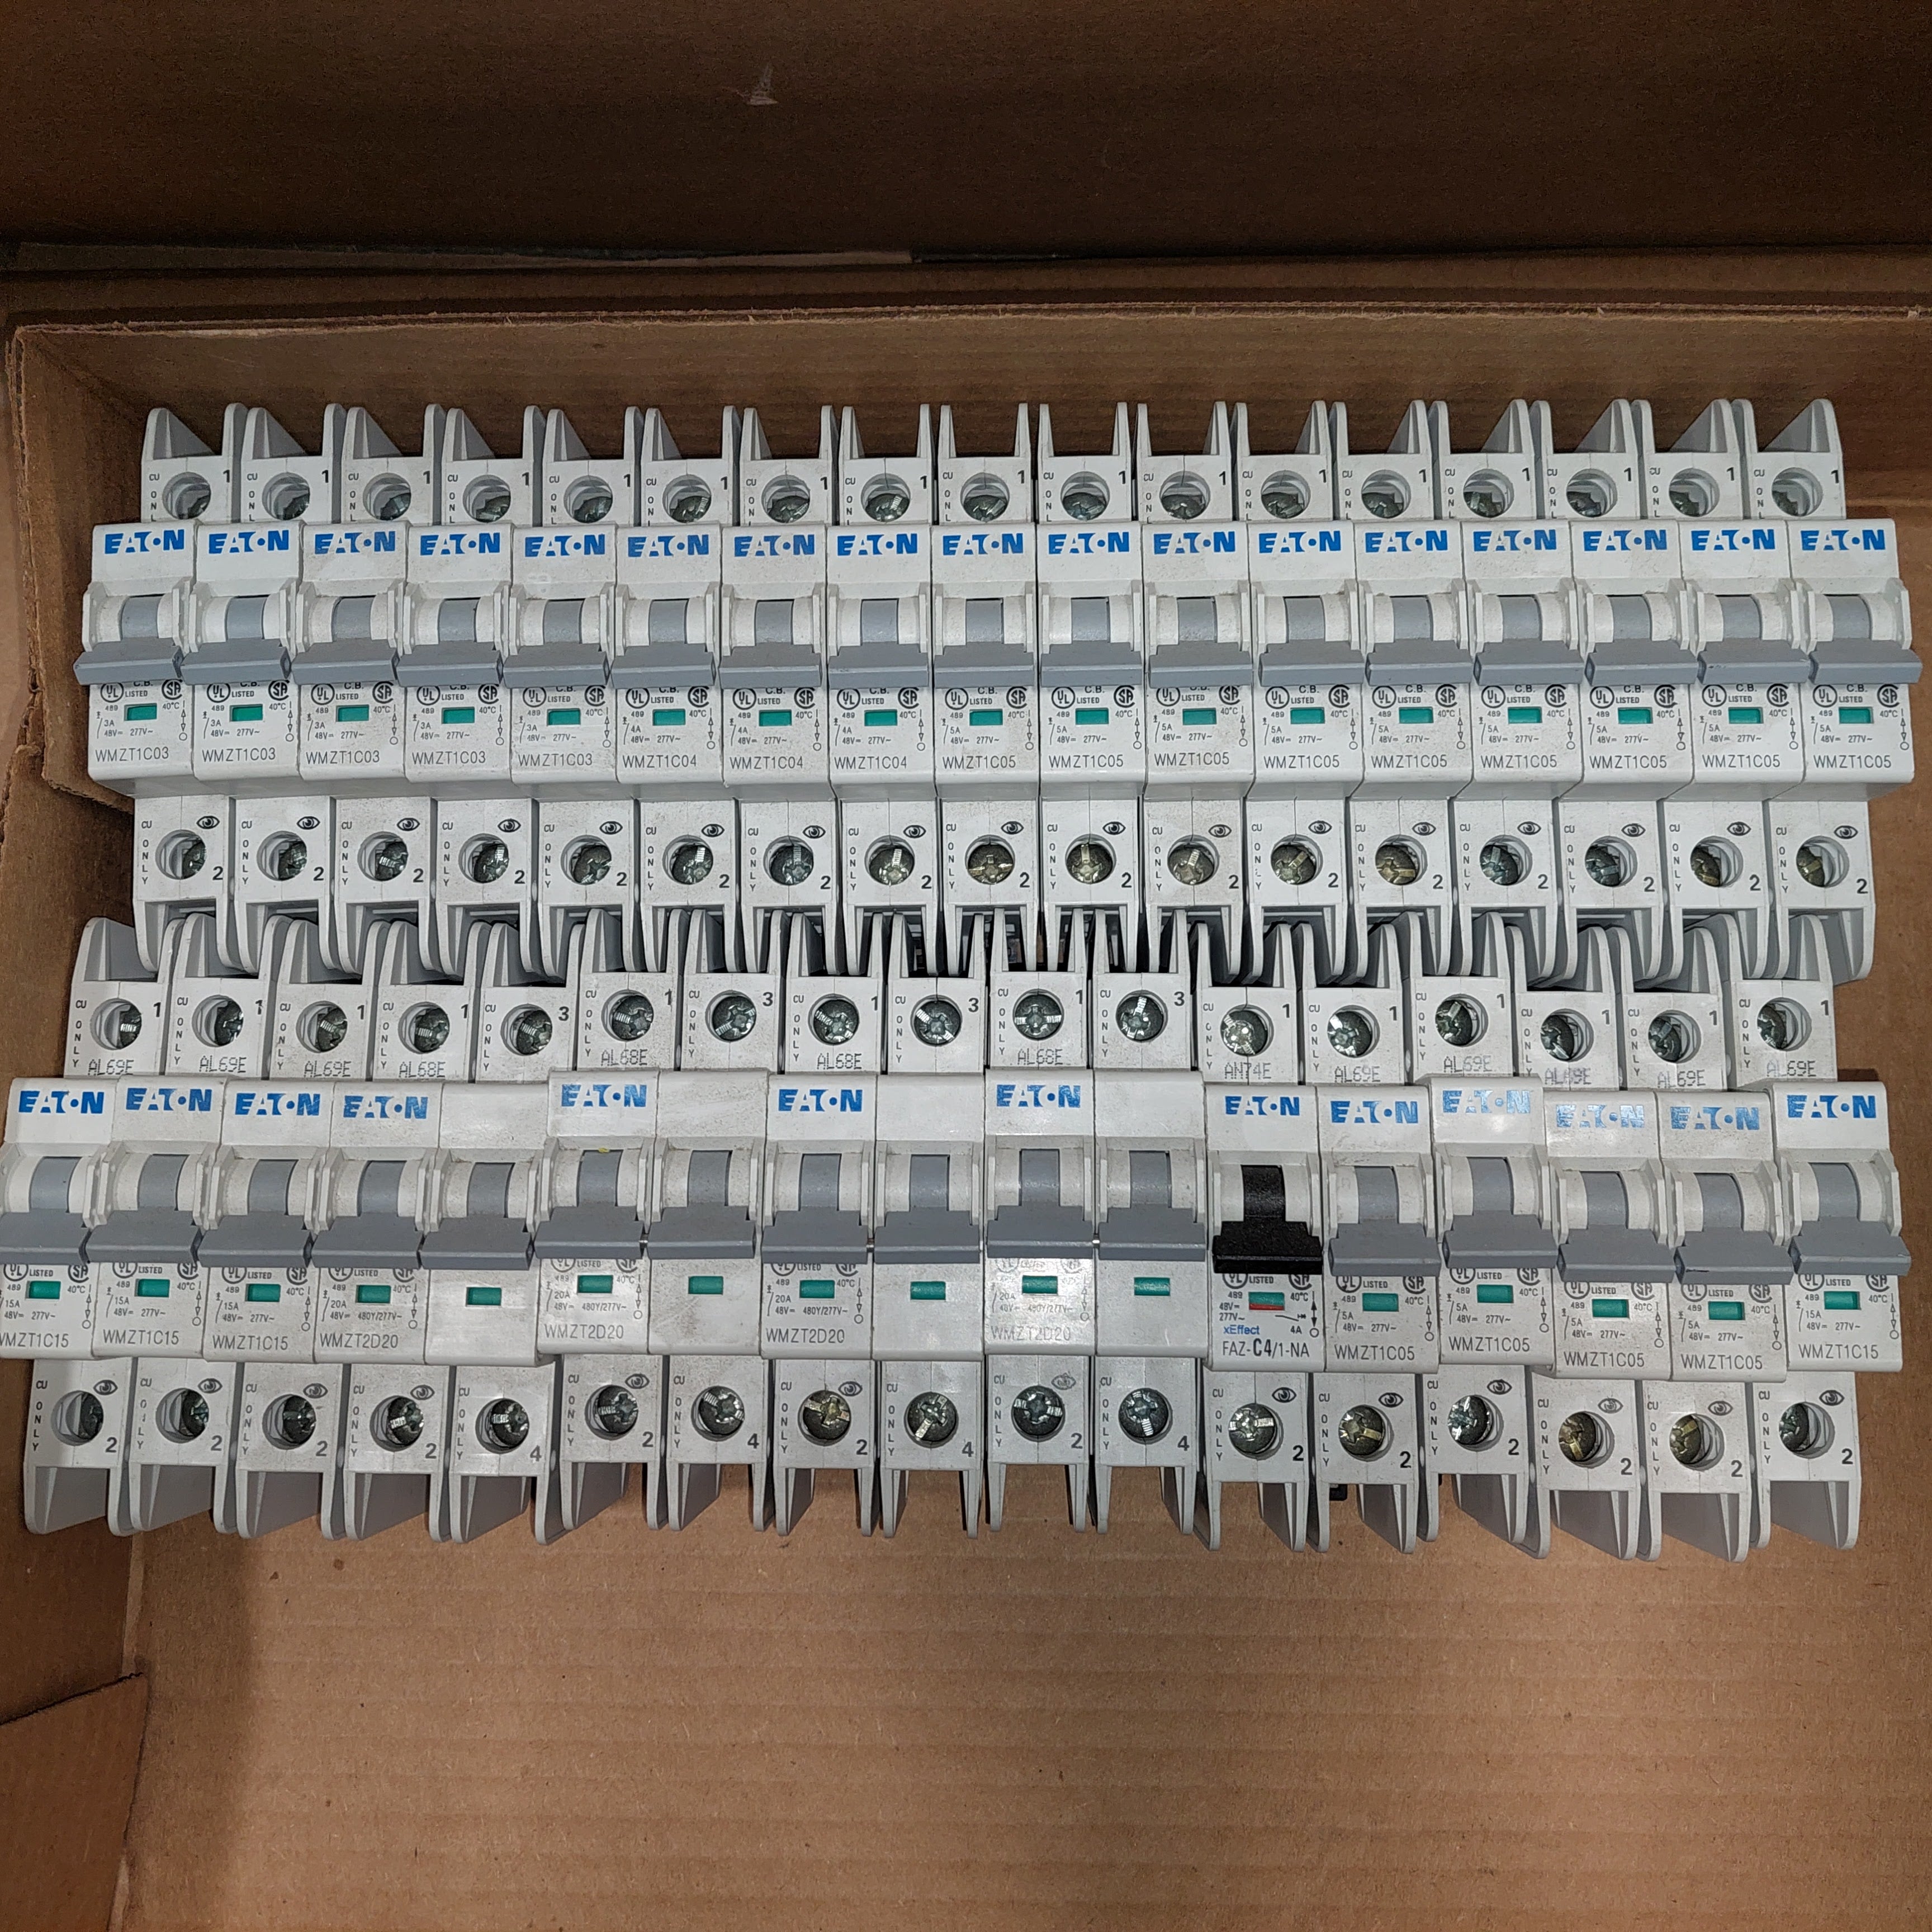 (30) Eaton DIN Rail Breakers, WMZT 3A, 4A, 5A, 15A, 20A  Used